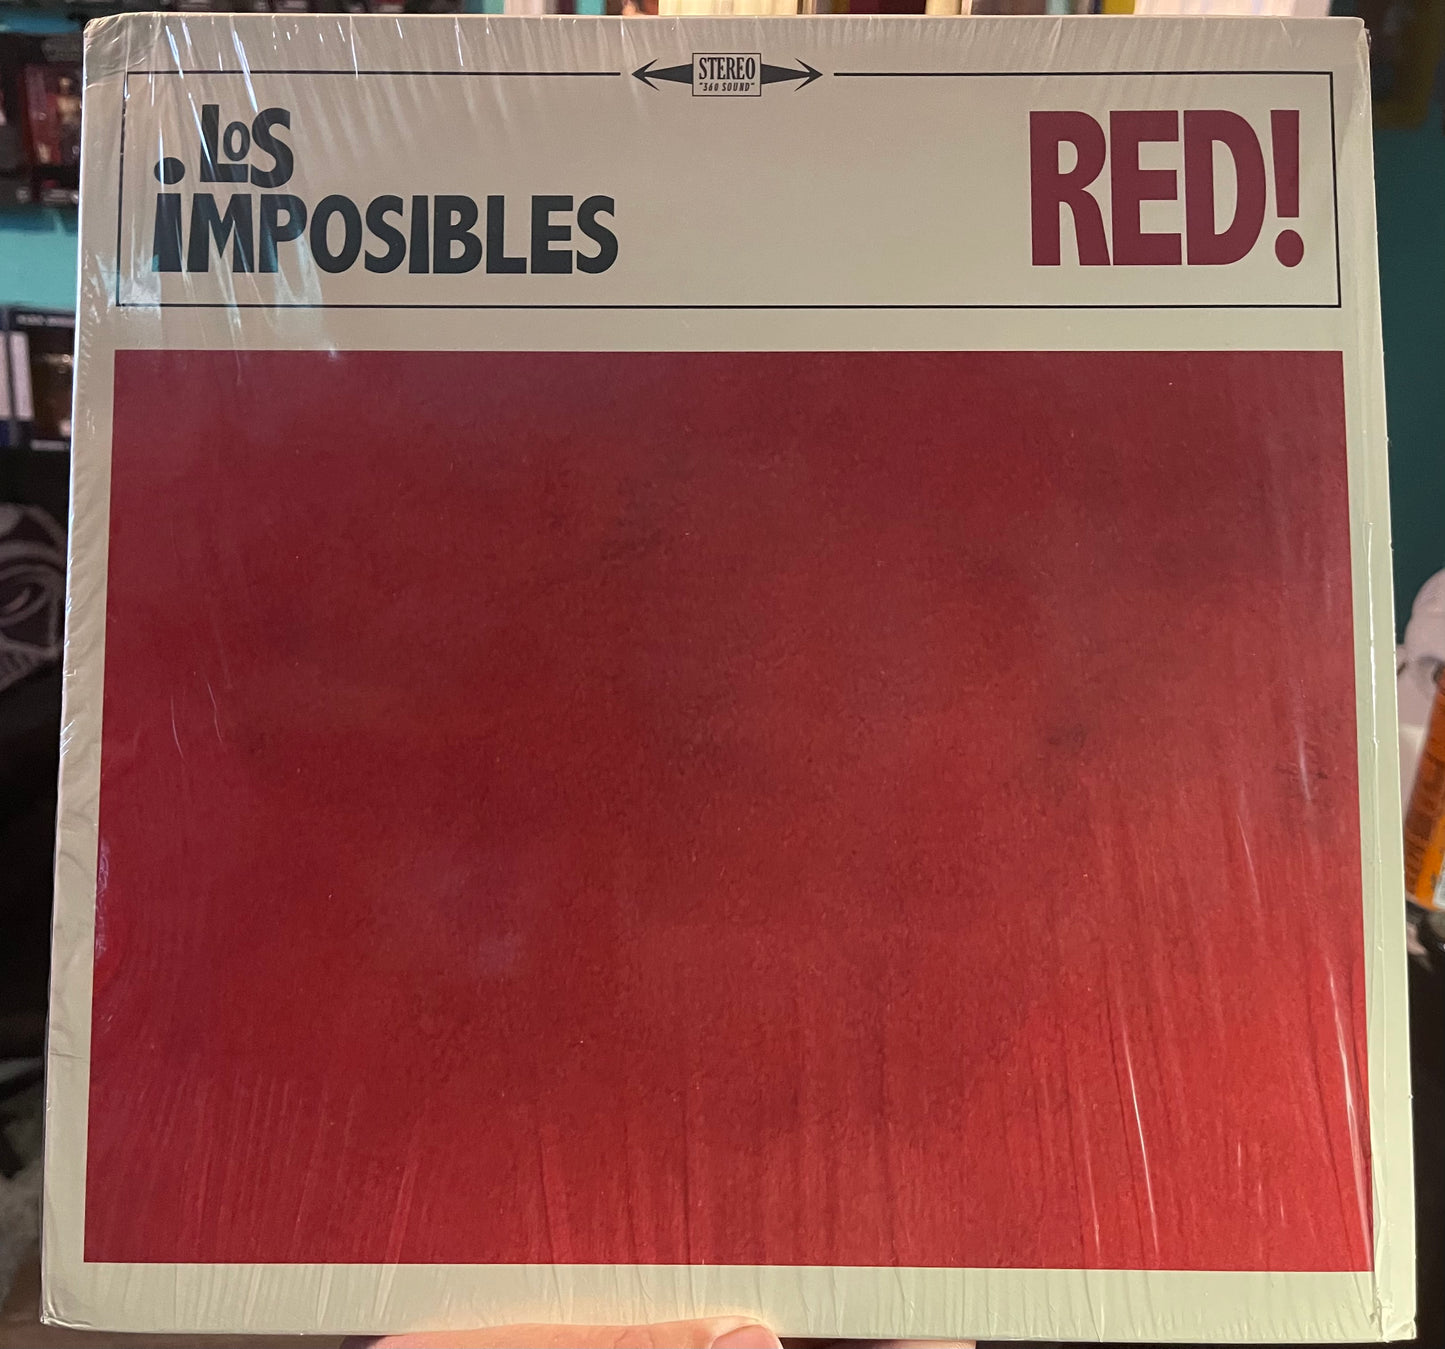 OMRDST-020 Los Imposibles “Red” LP (Import)